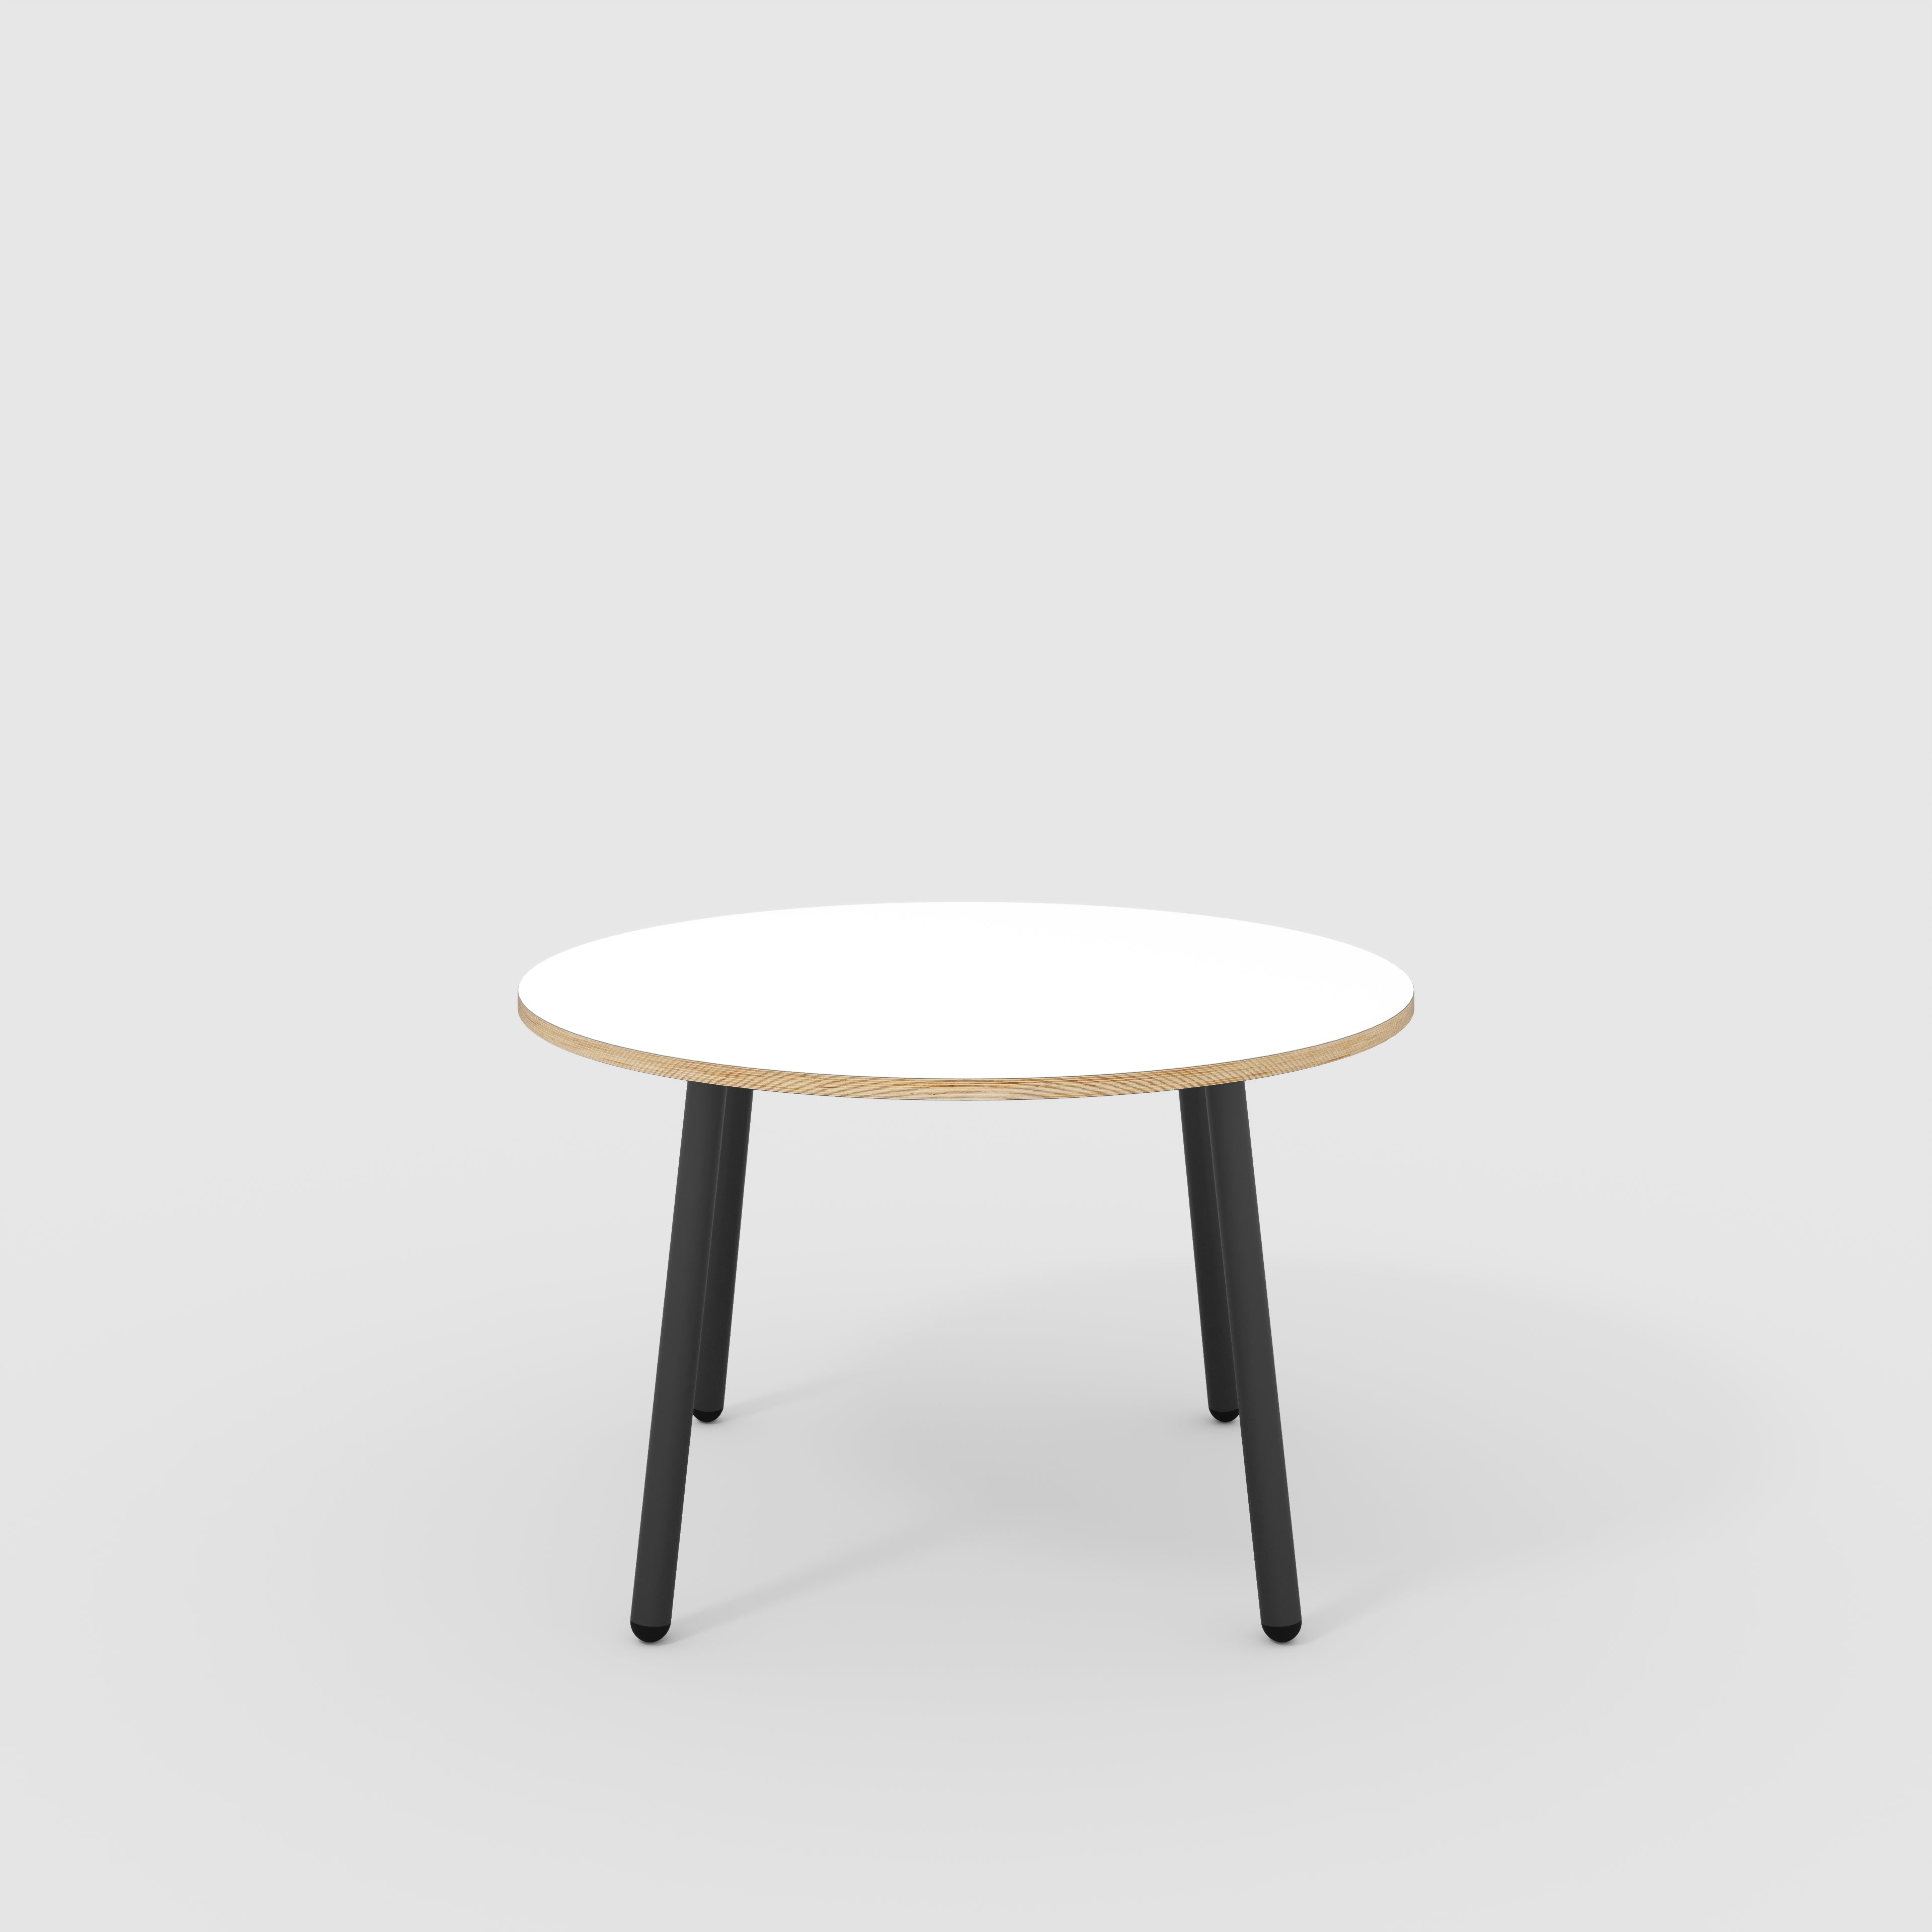 Round Table with Black Round Single Pin Legs - Formica White - 1200(dia) x 750(h)